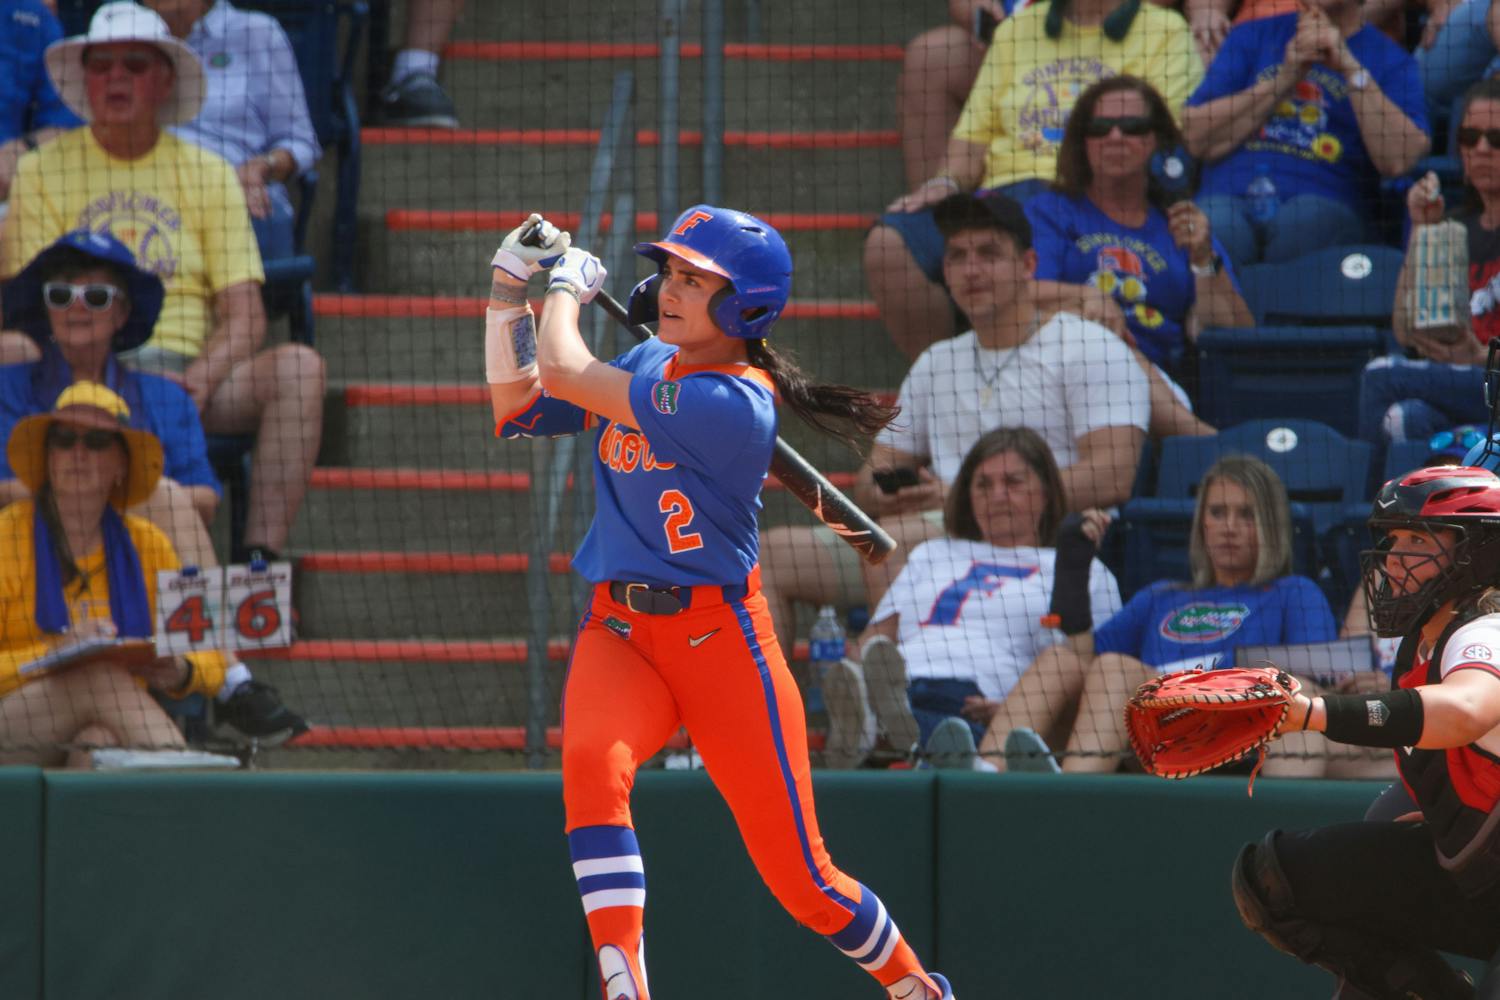 Florida infielder Avery Goelz finishes her swing in the Gators' 8-7 win against the Georgia Bulldogs Saturday, April 15, 2023